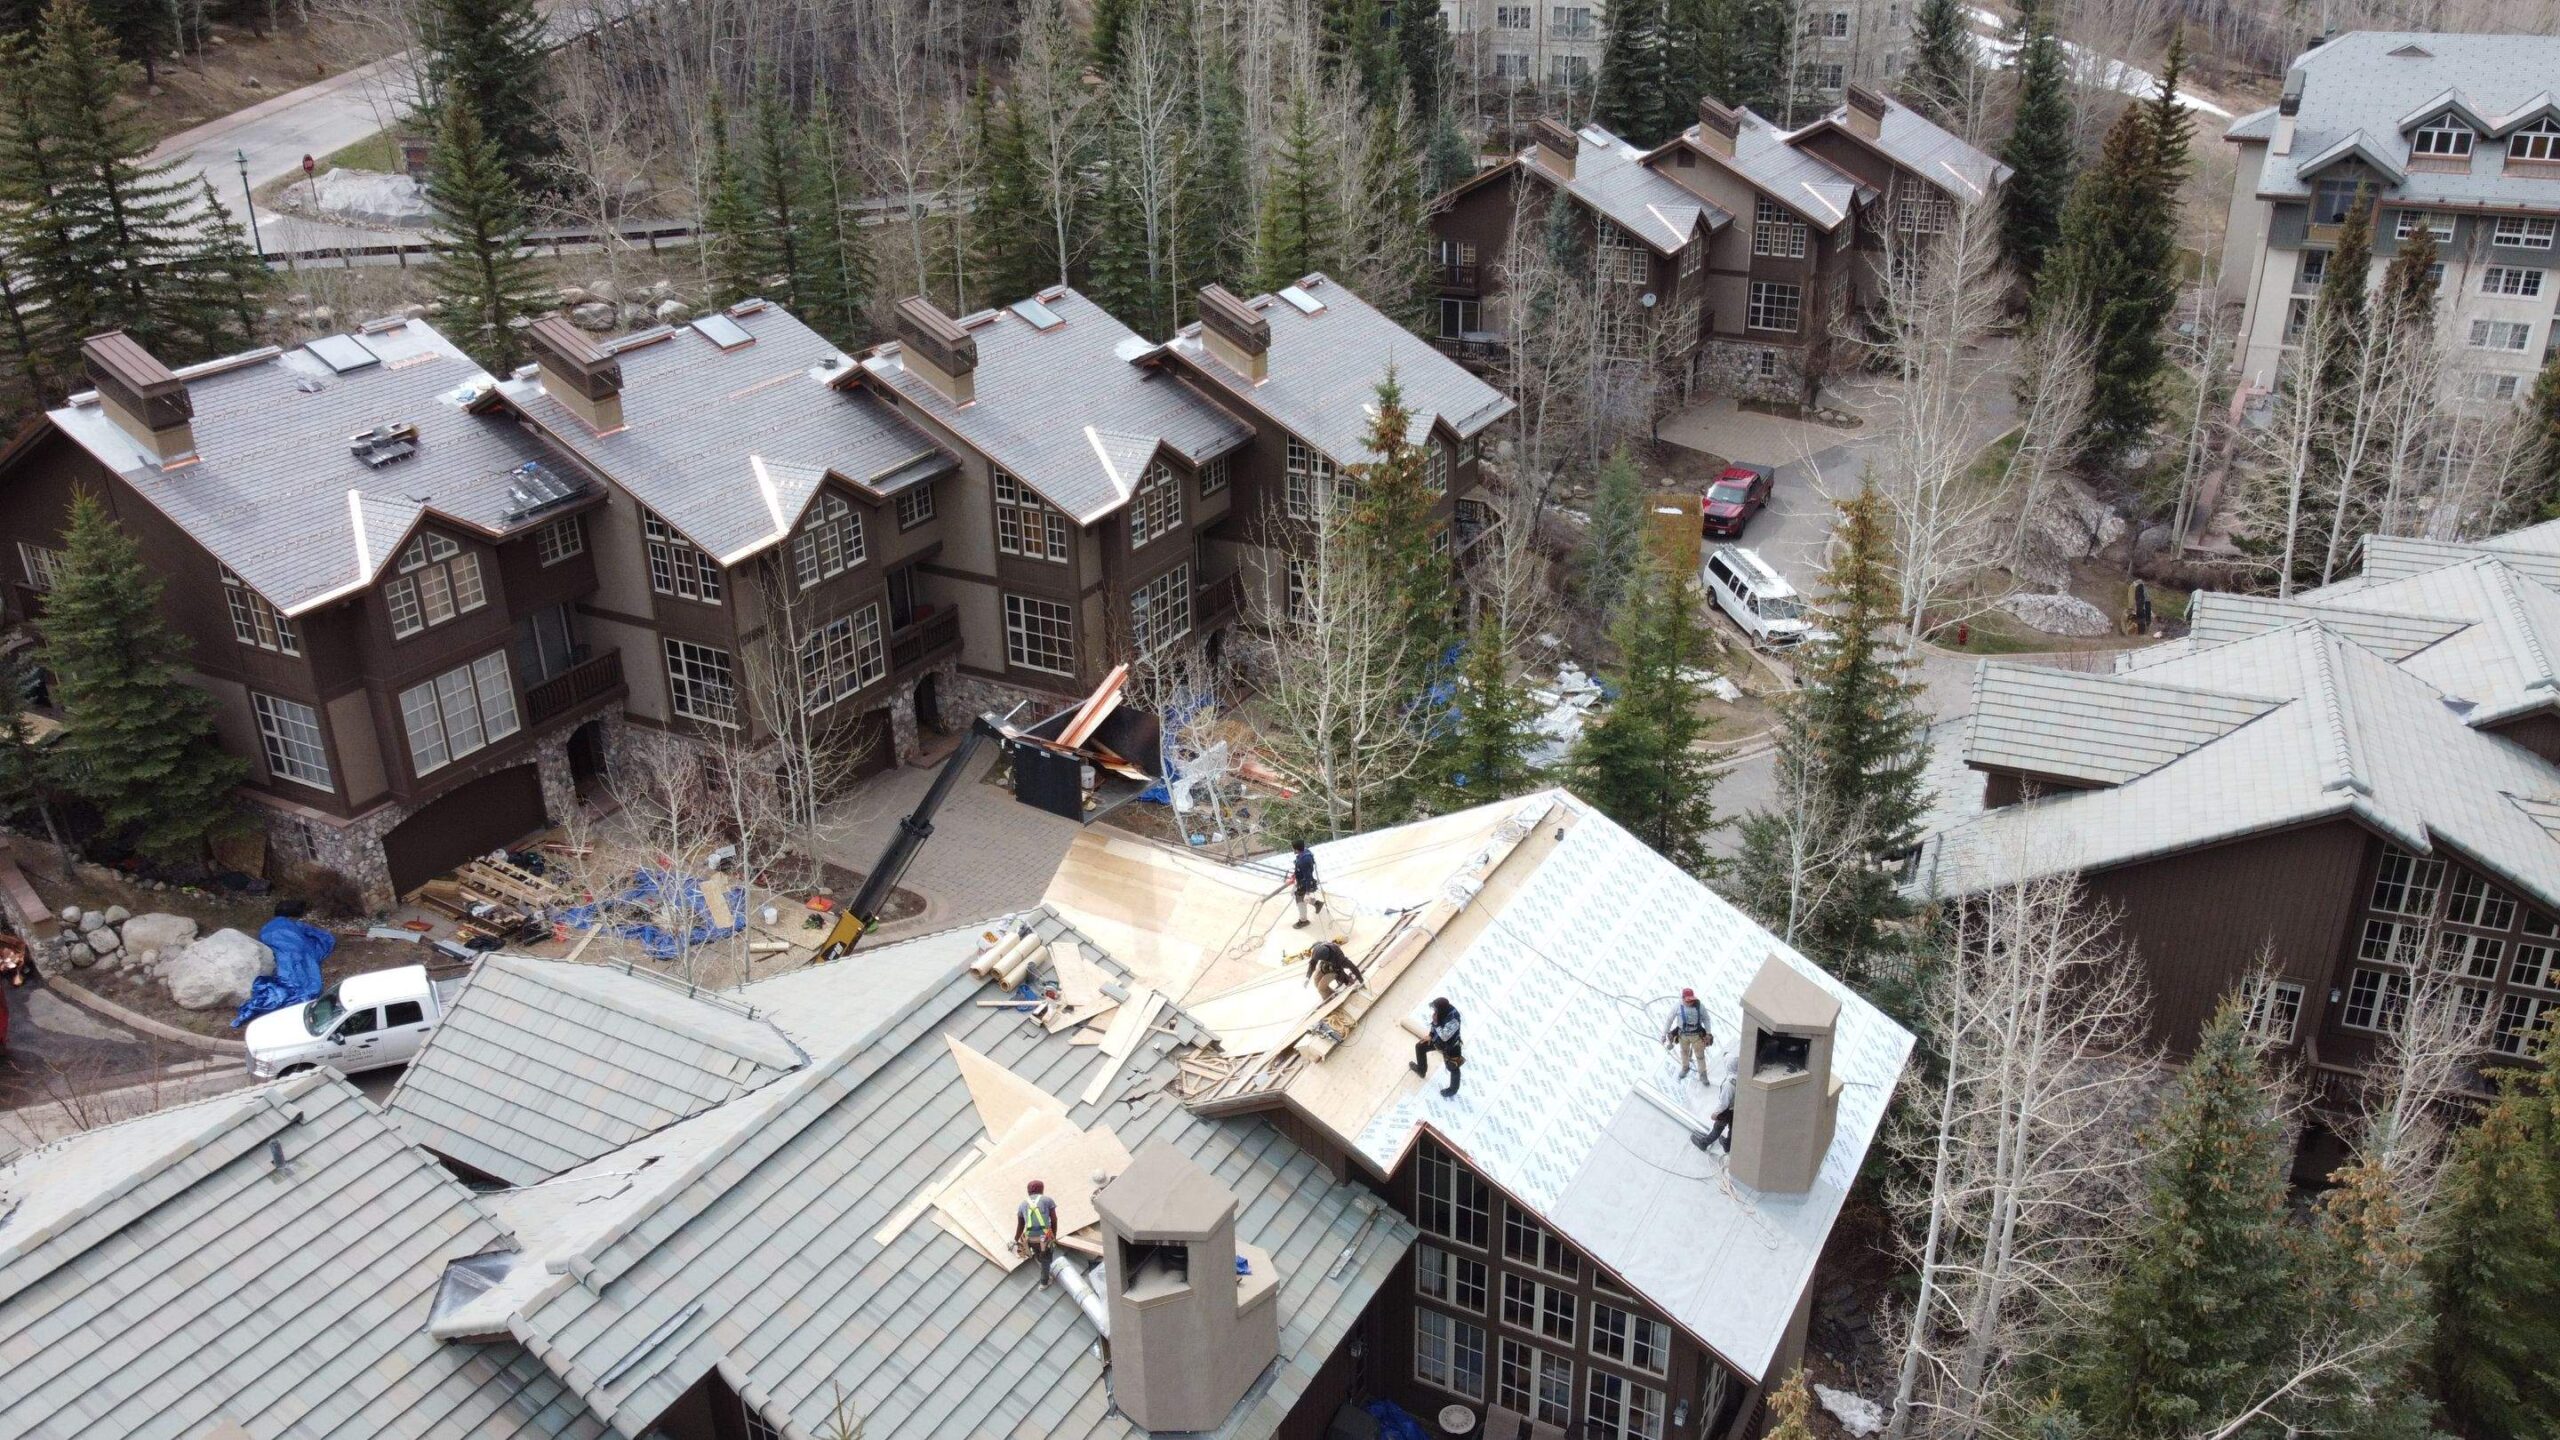 Workers on the roof of a mountain resort cabin under construction, surrounded by pine trees and adjacent cabins with snow on the ground.